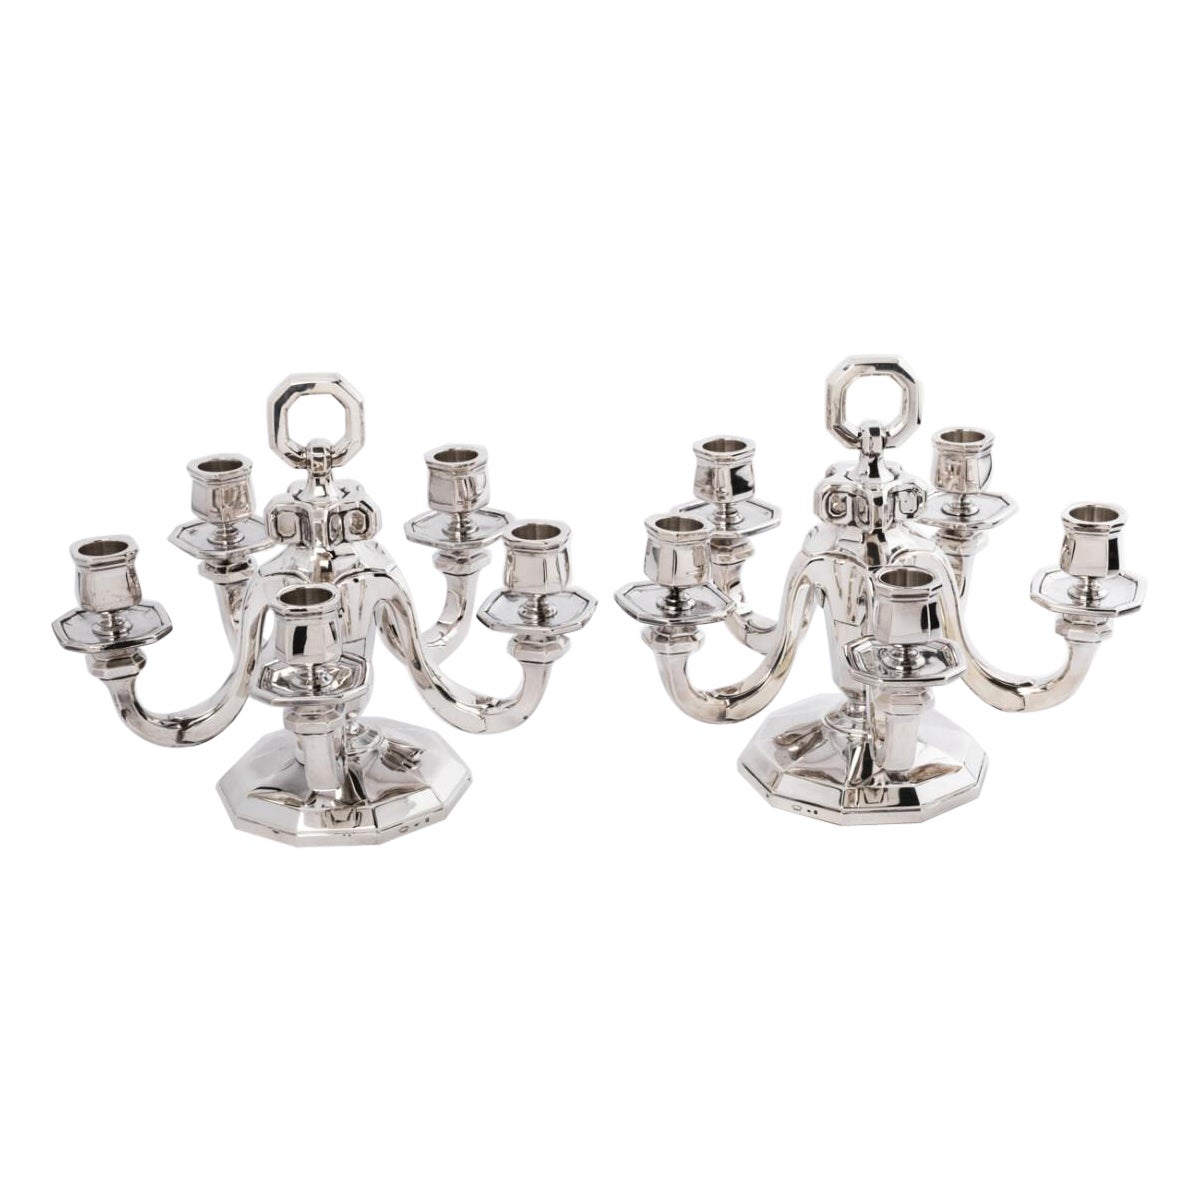 Goldsmith Gustave Keller Pair of candelabras in sterling silver, art deco period